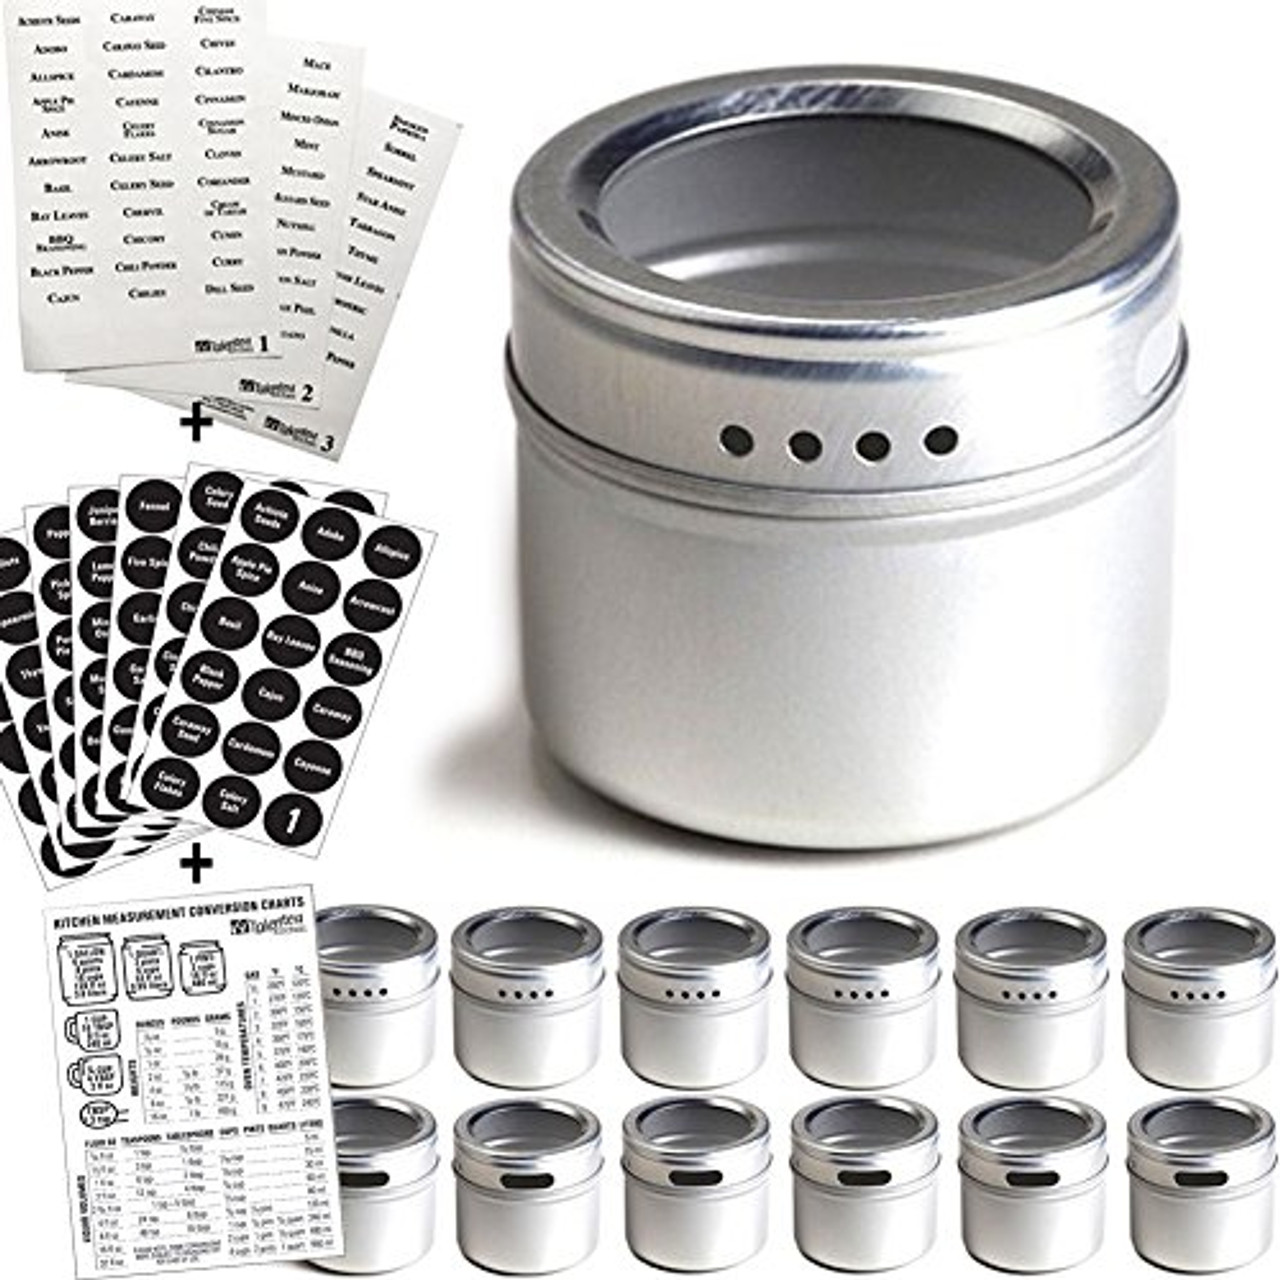 20-Pack Magnetic Spice Containers, Spice Tins with Clear Sift and